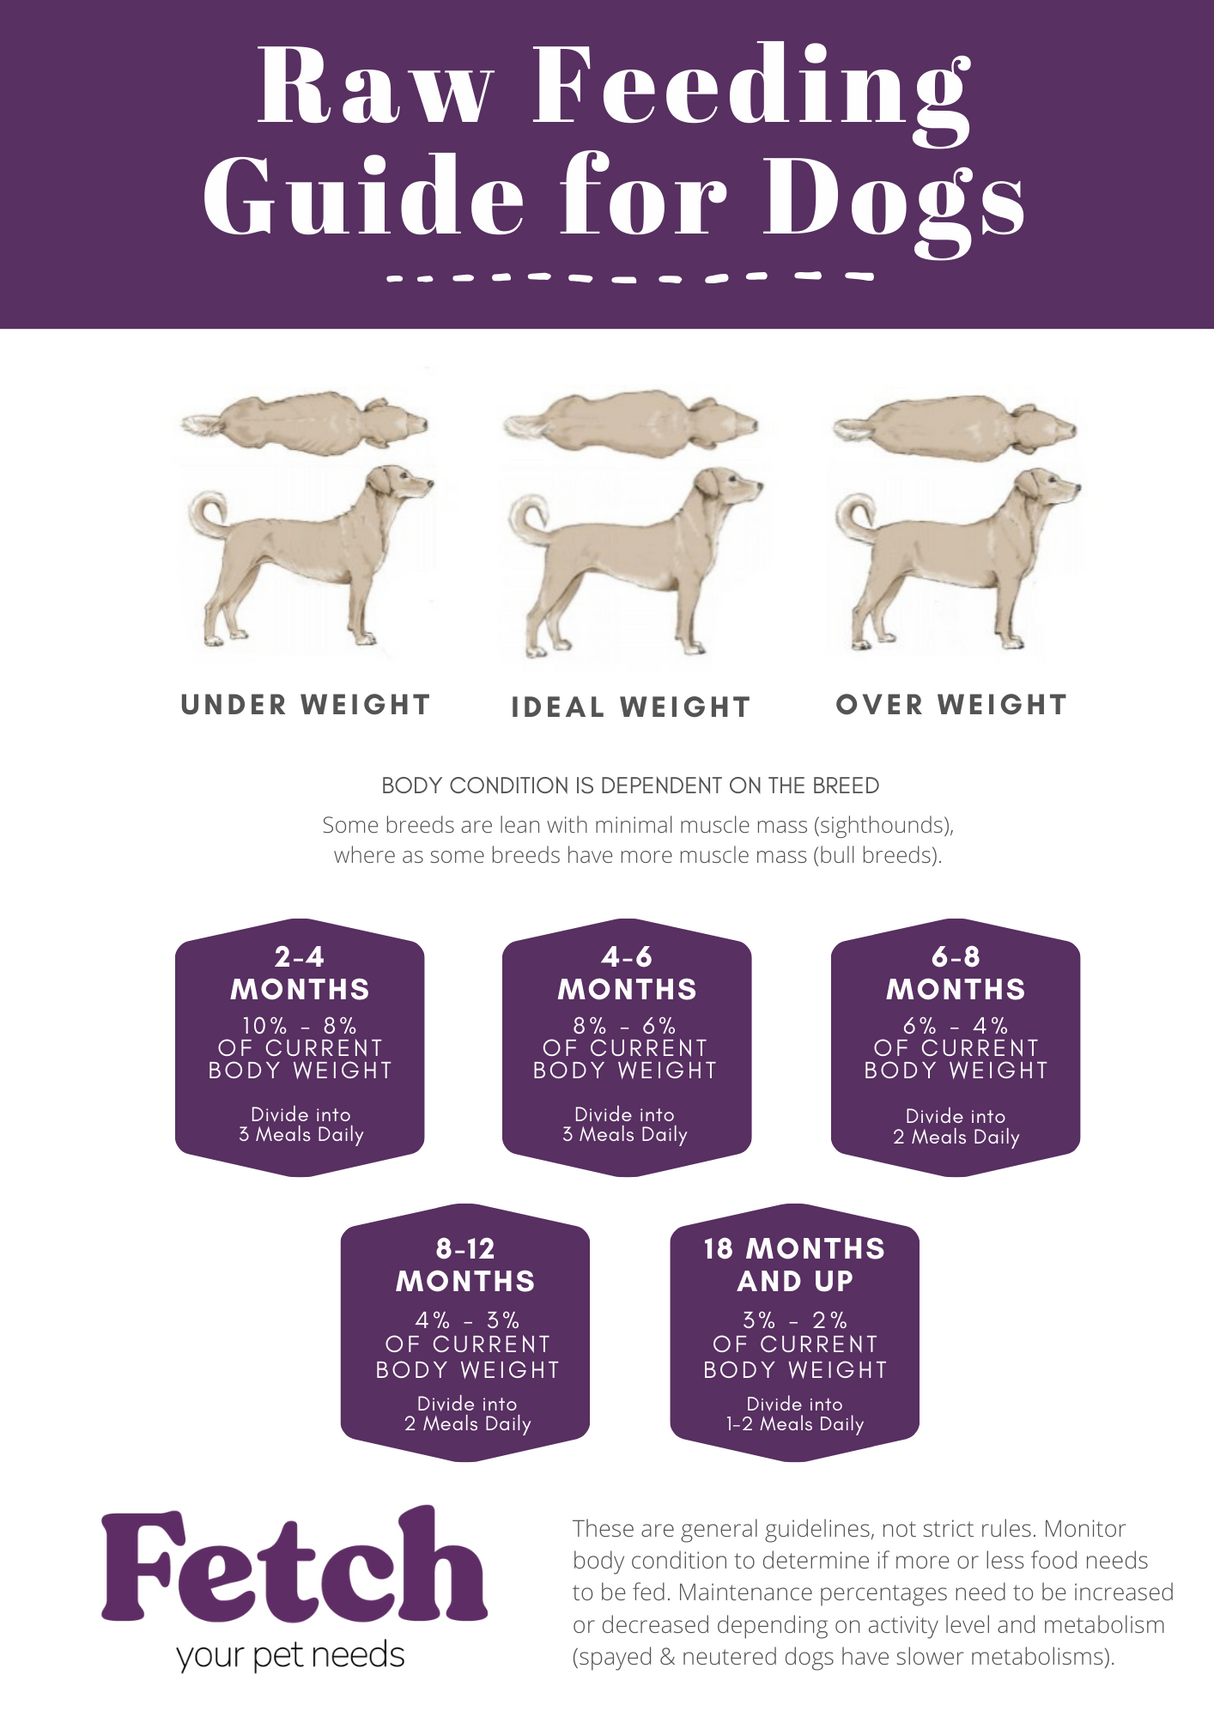 Raw Feeding Guide for Dogs